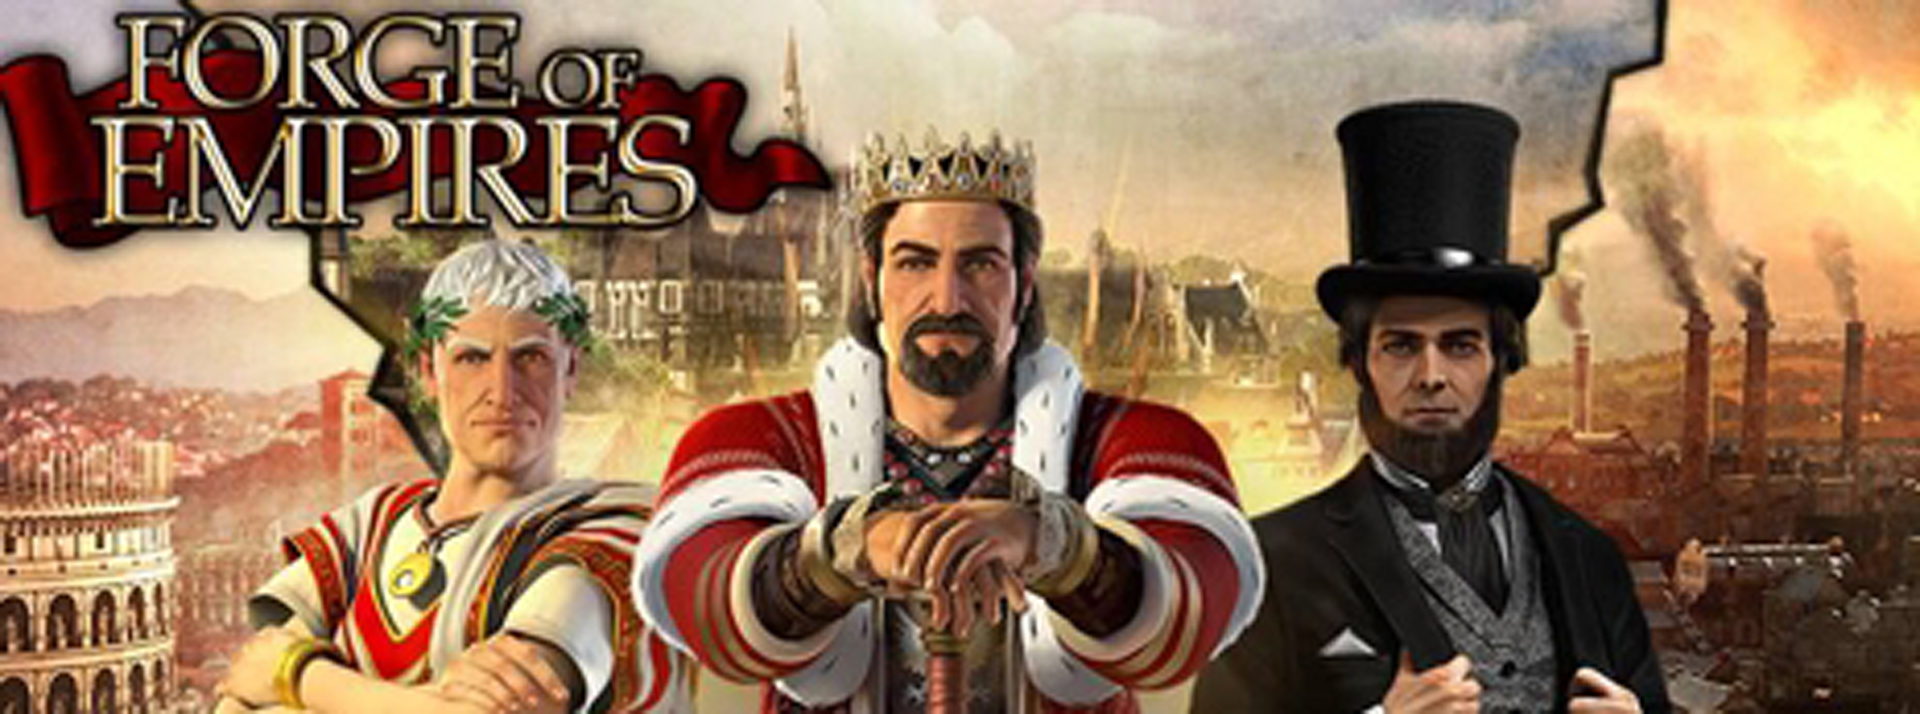 forge of empires mobile review